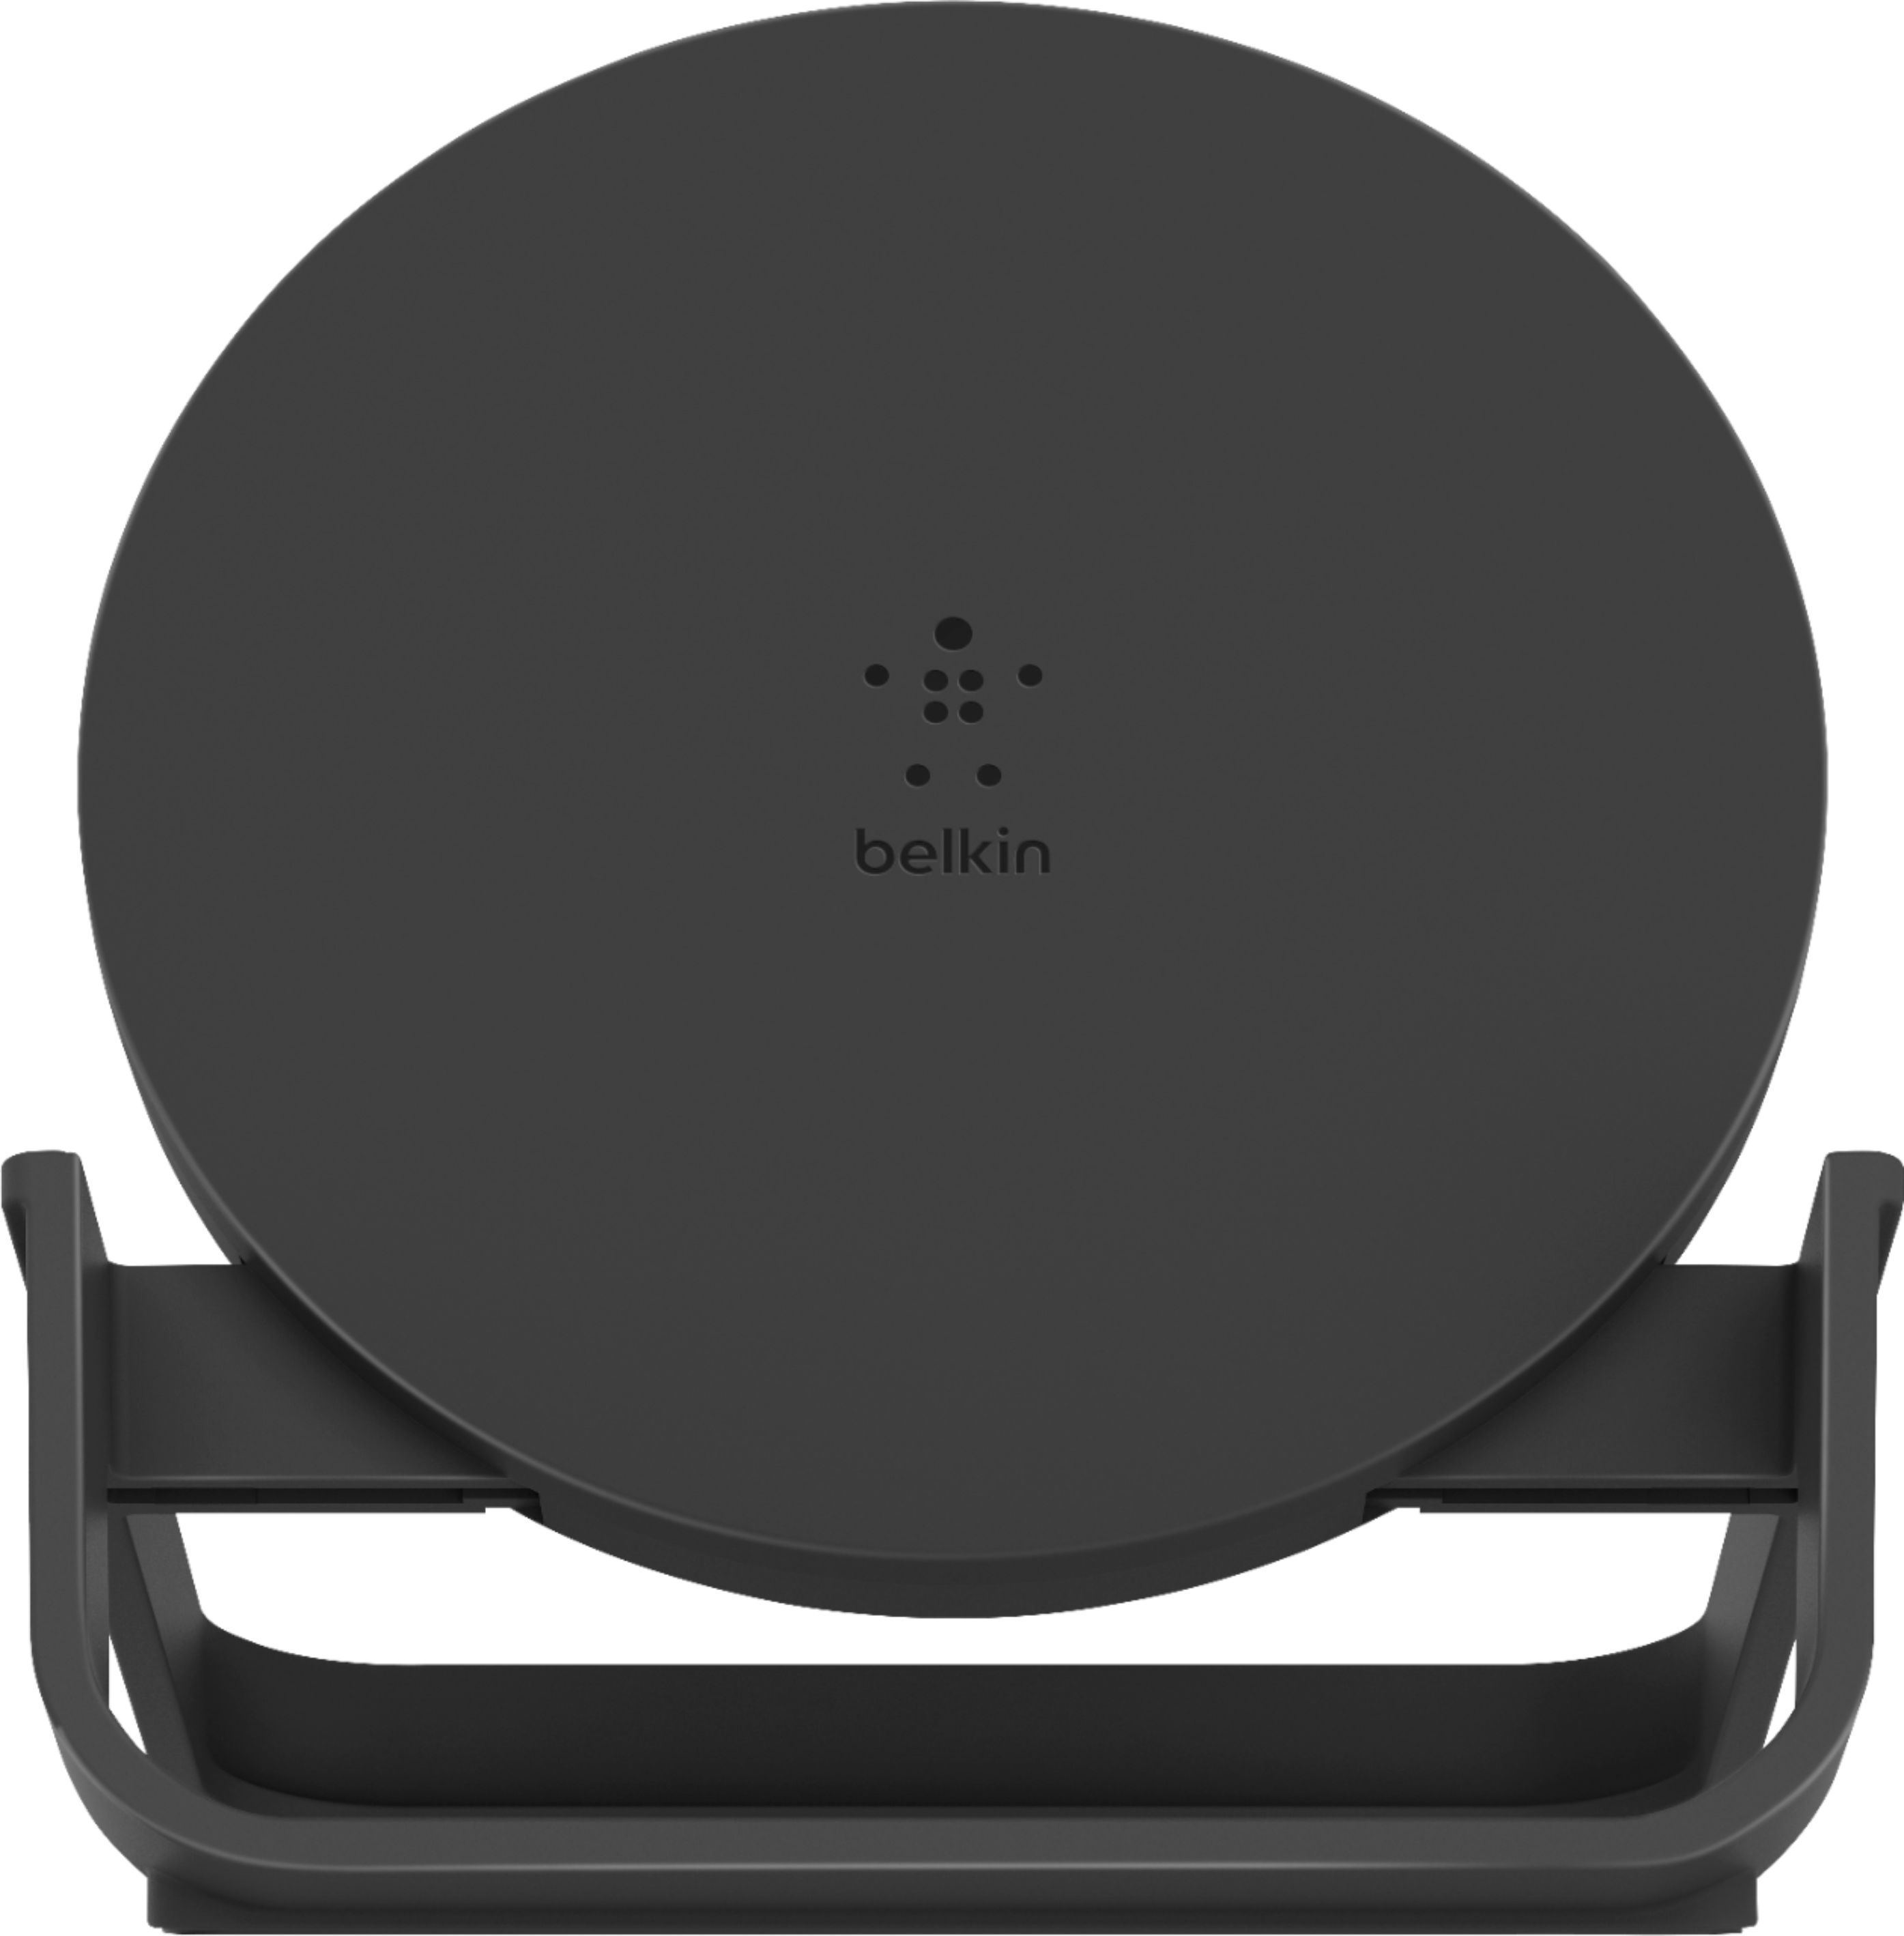 Belkin 10W Wireless Charger Stand Fast Charging iPhone, Samsung Galaxy Includes AC Adapter Black - Buy